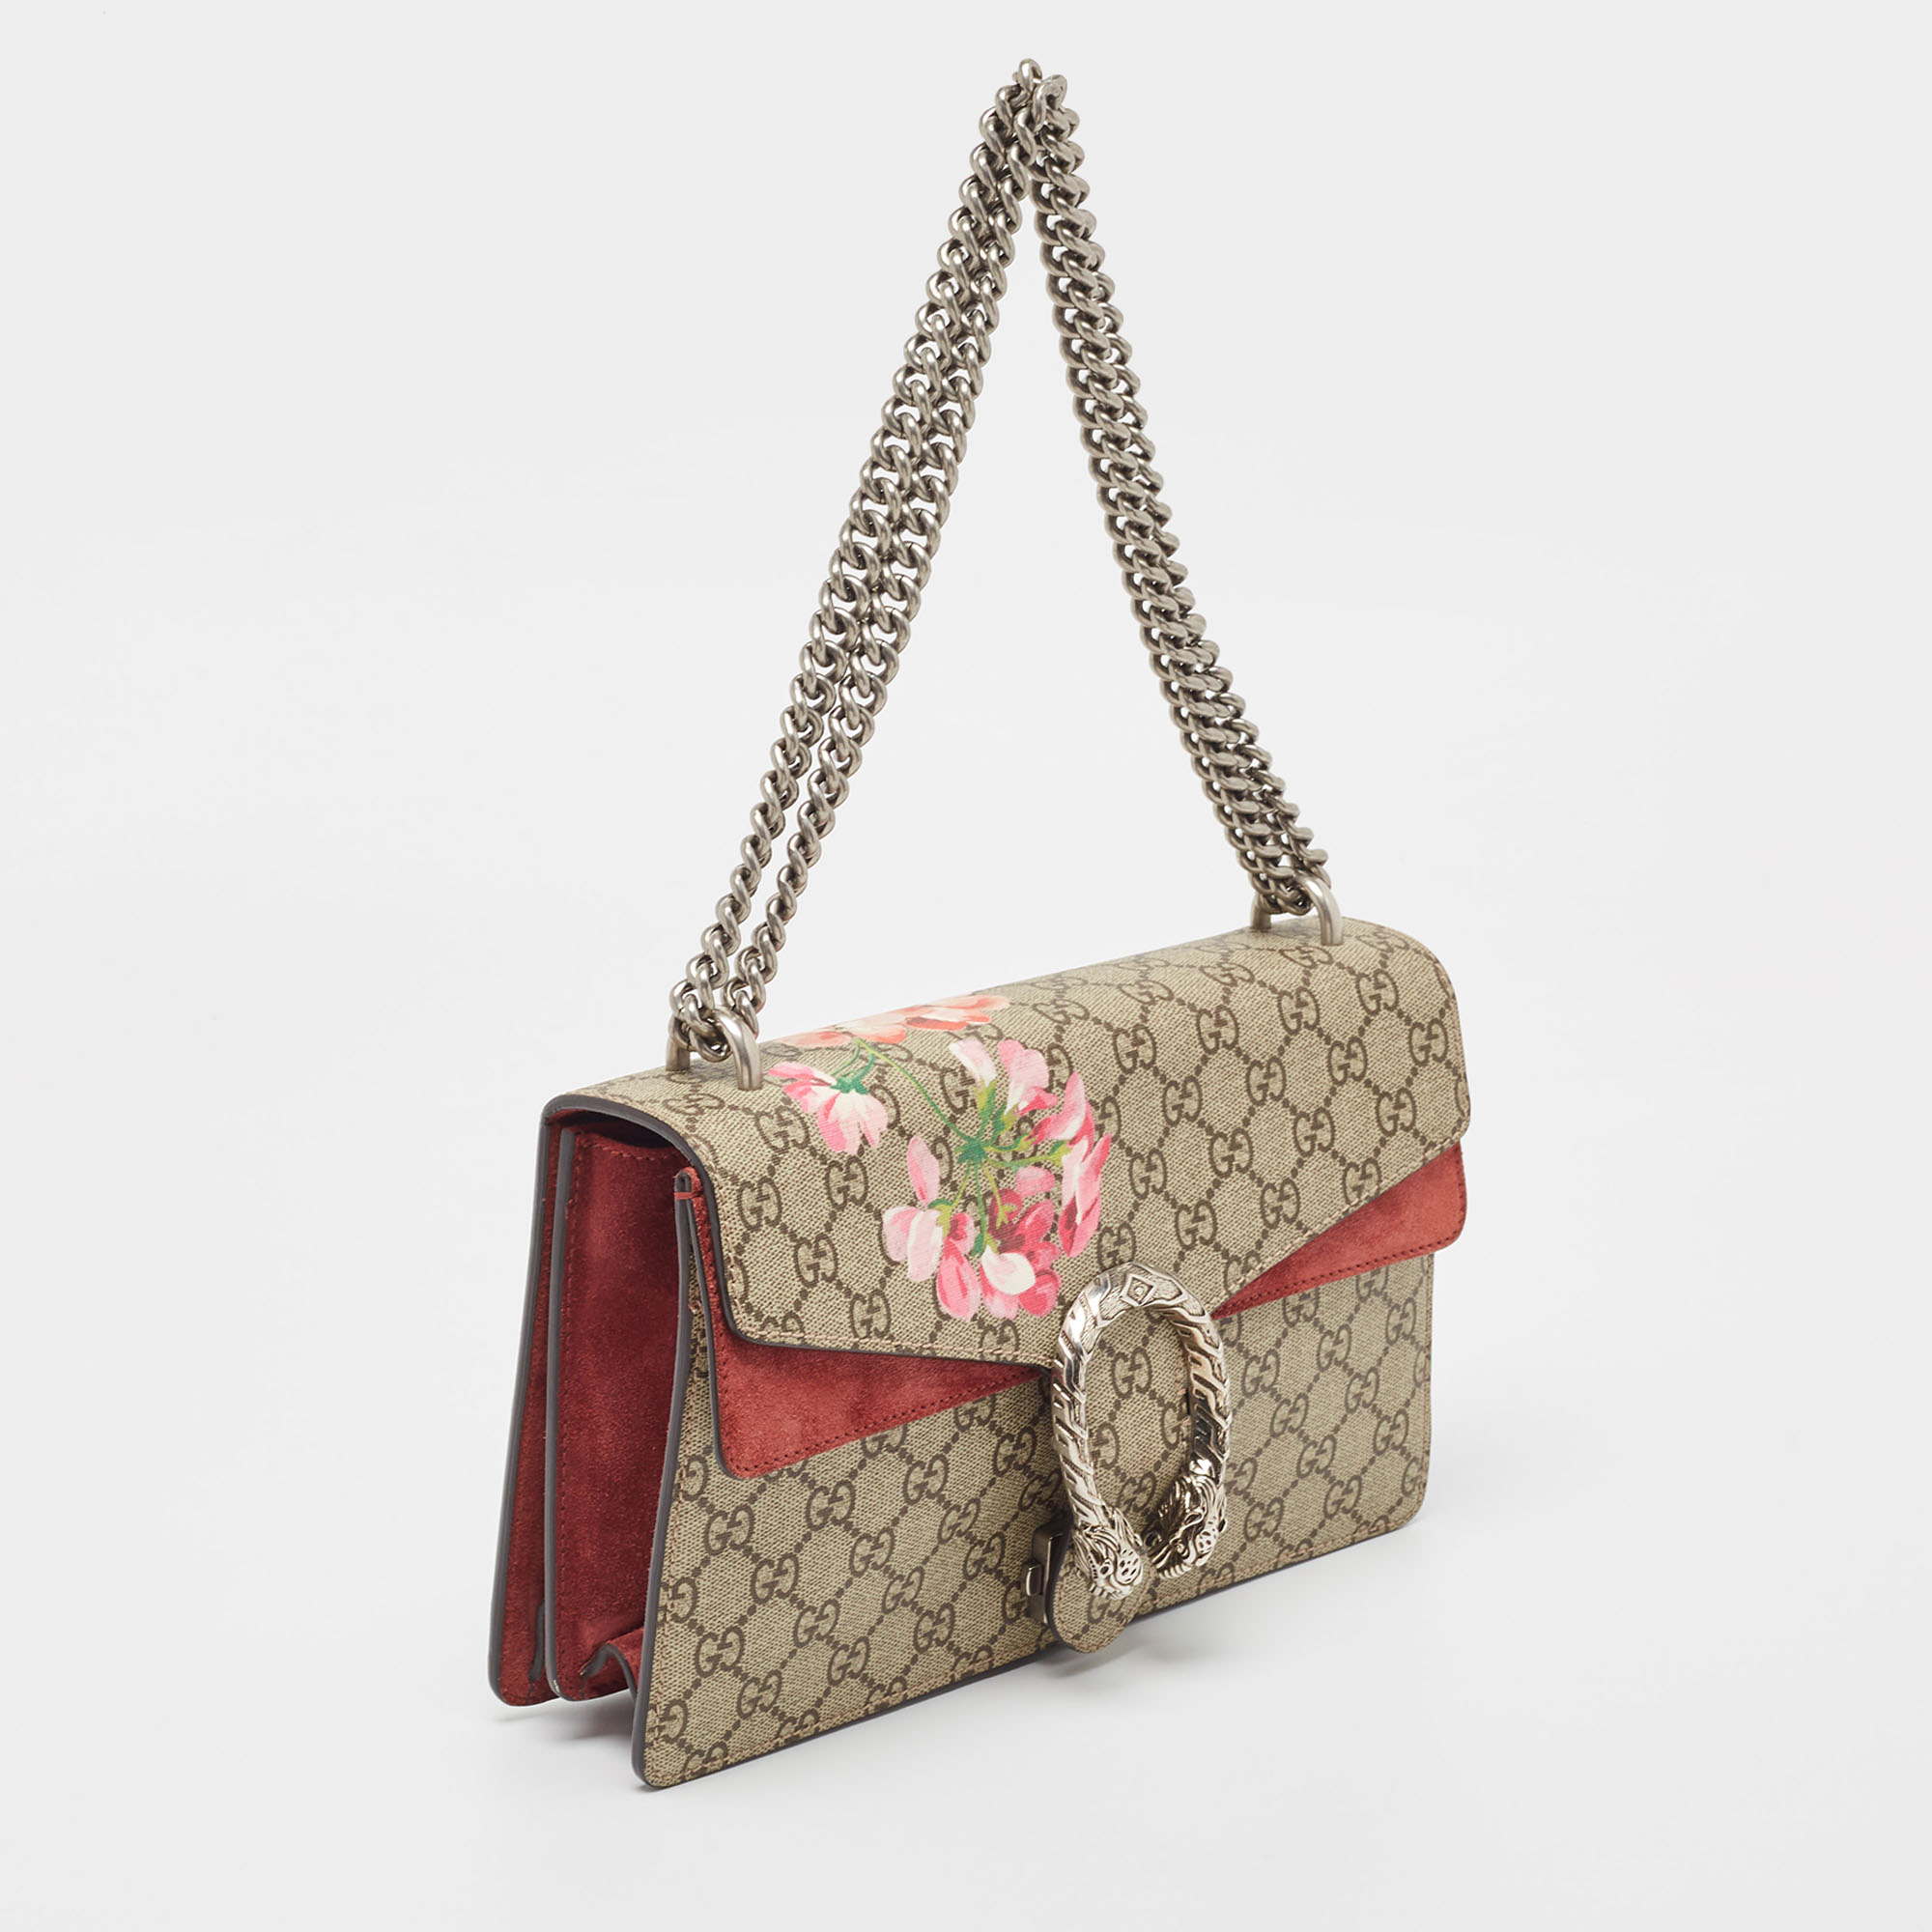 Gucci Beige/Red GG Supreme And Suede Small Dionysus Shoulder Bag